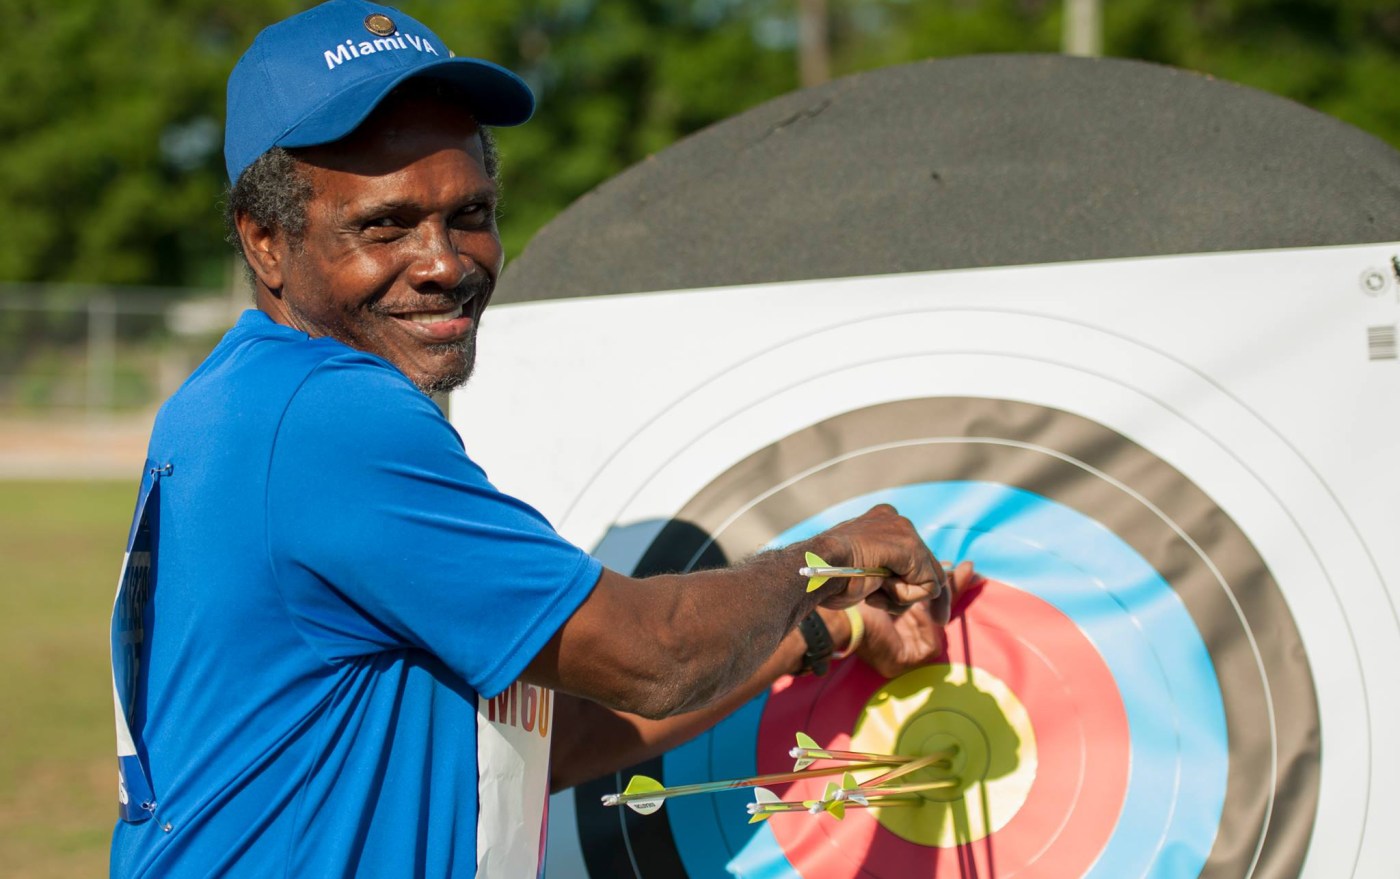 On target: Army Veteran hits the mark with archery at National Veterans Golden Age Games